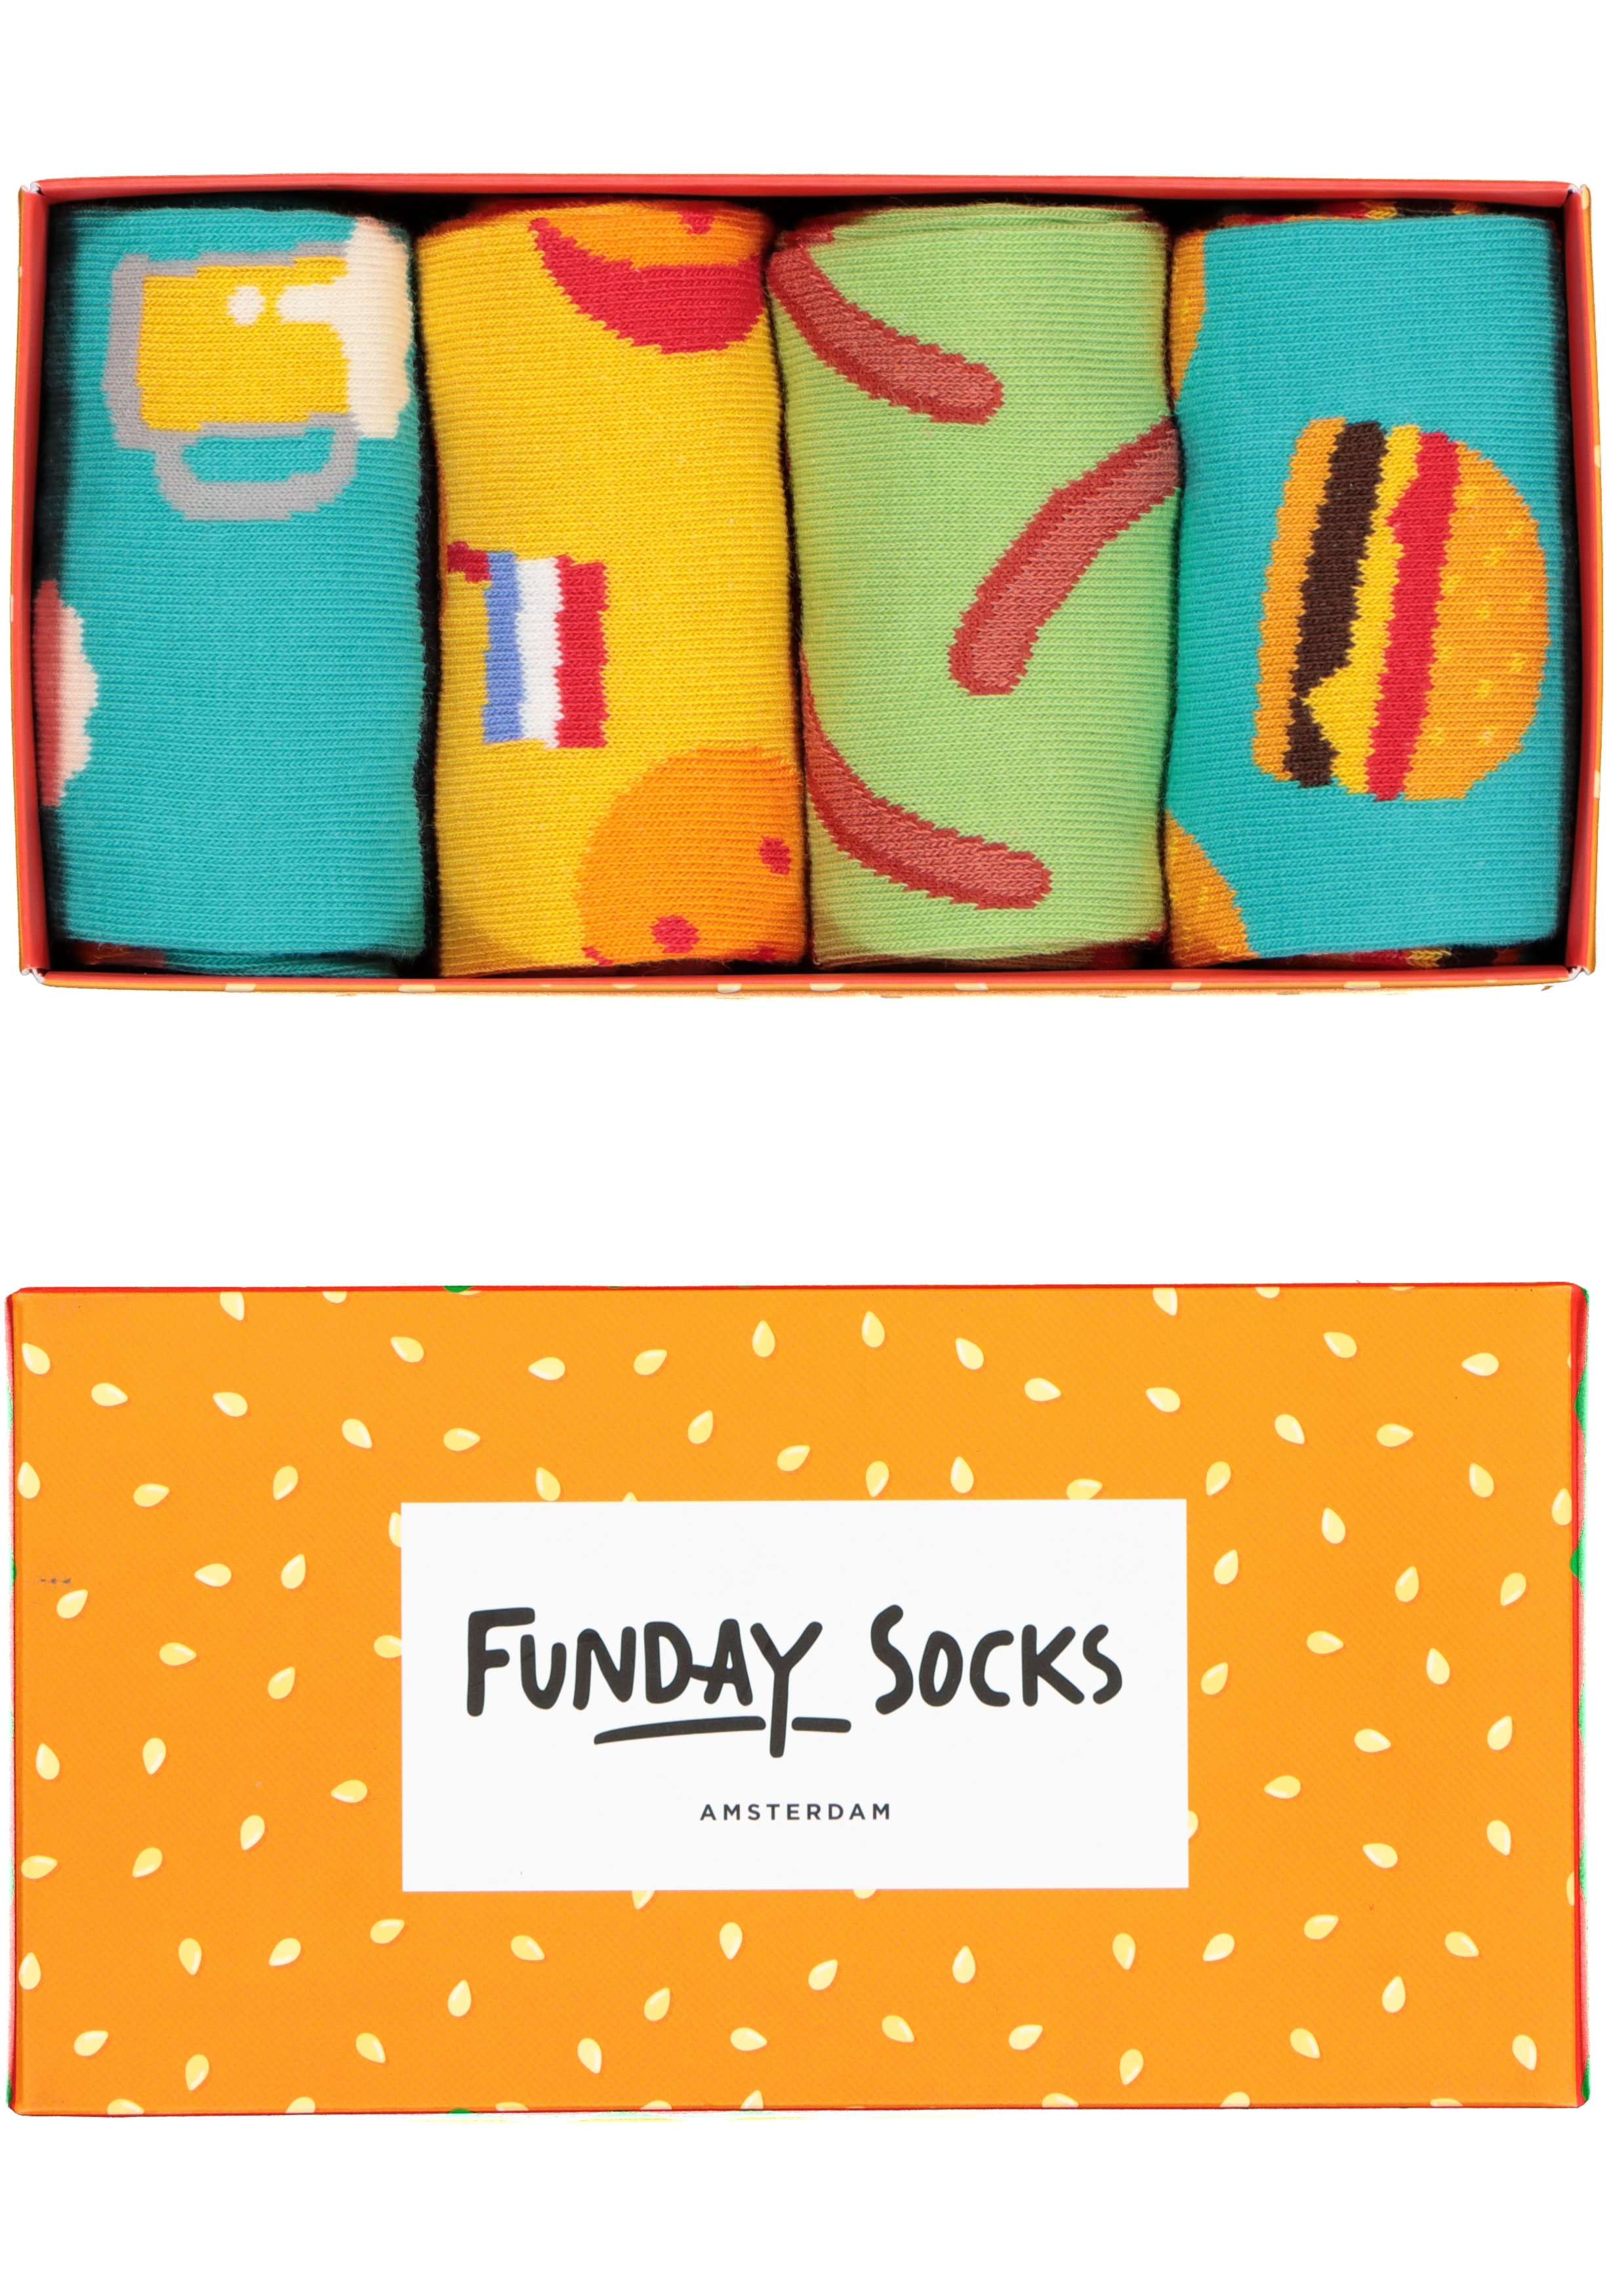 Funday Socks Giftset unisex sokken (4-pack), Beer and party food